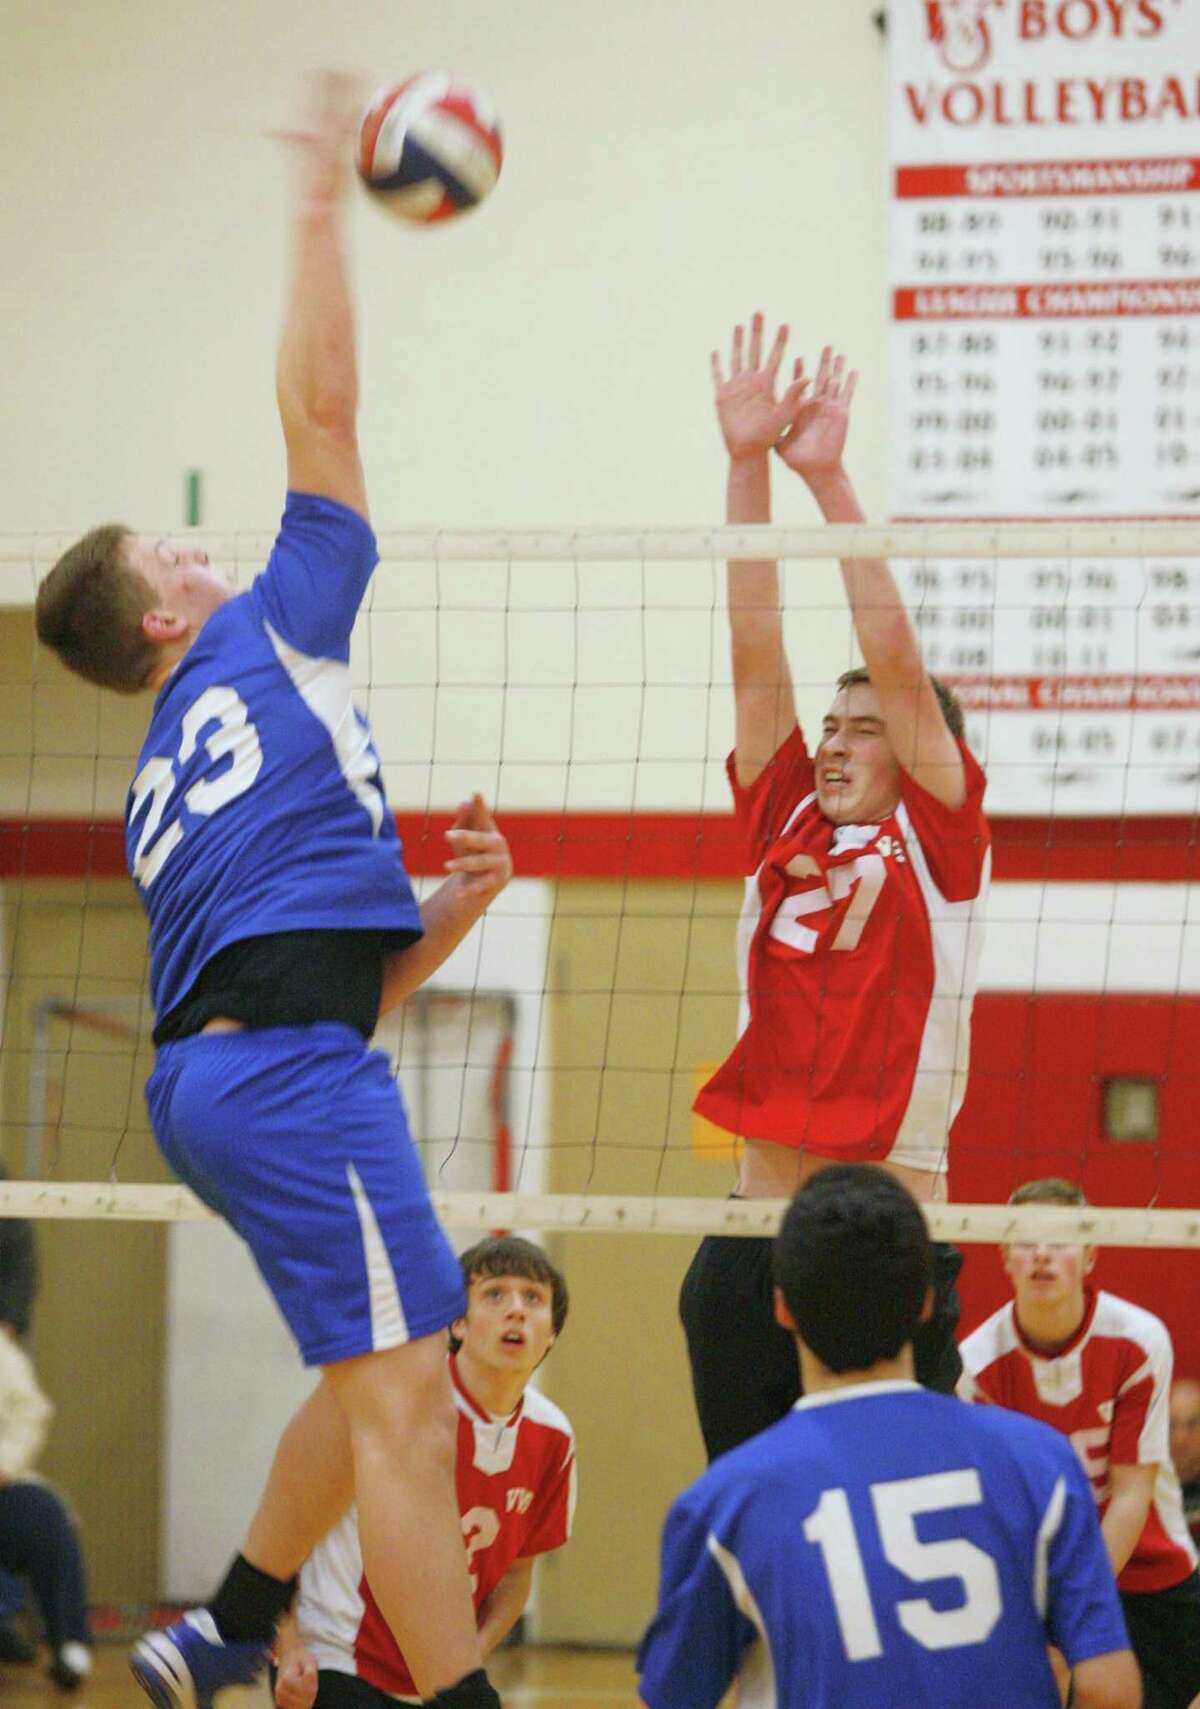 VVS boys volleyball set to face Living Word Academy in Class B final rematch